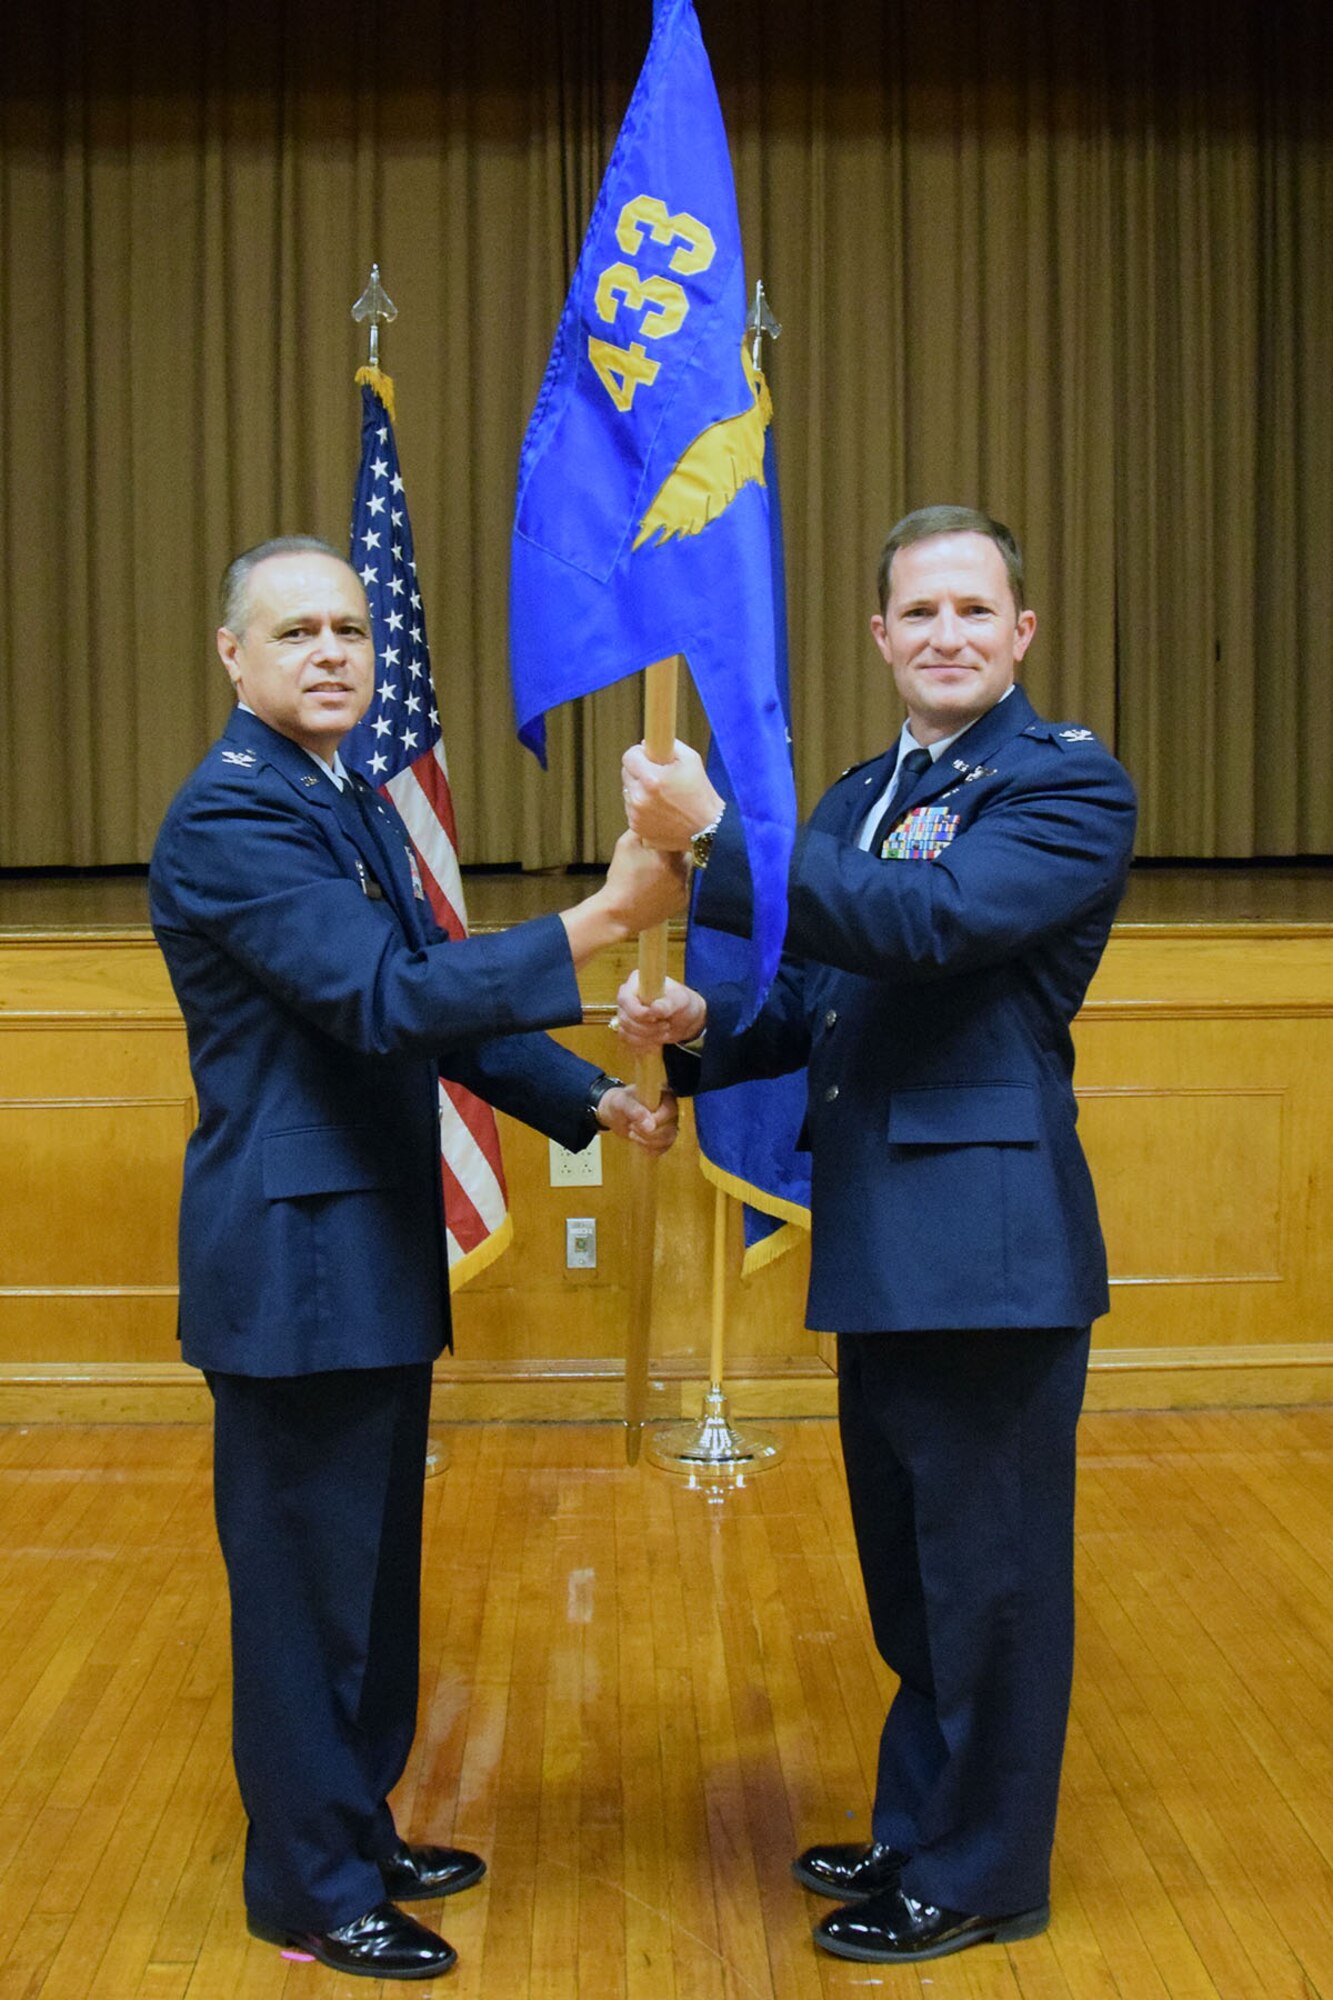 433rd Medical Squadron receives new commander